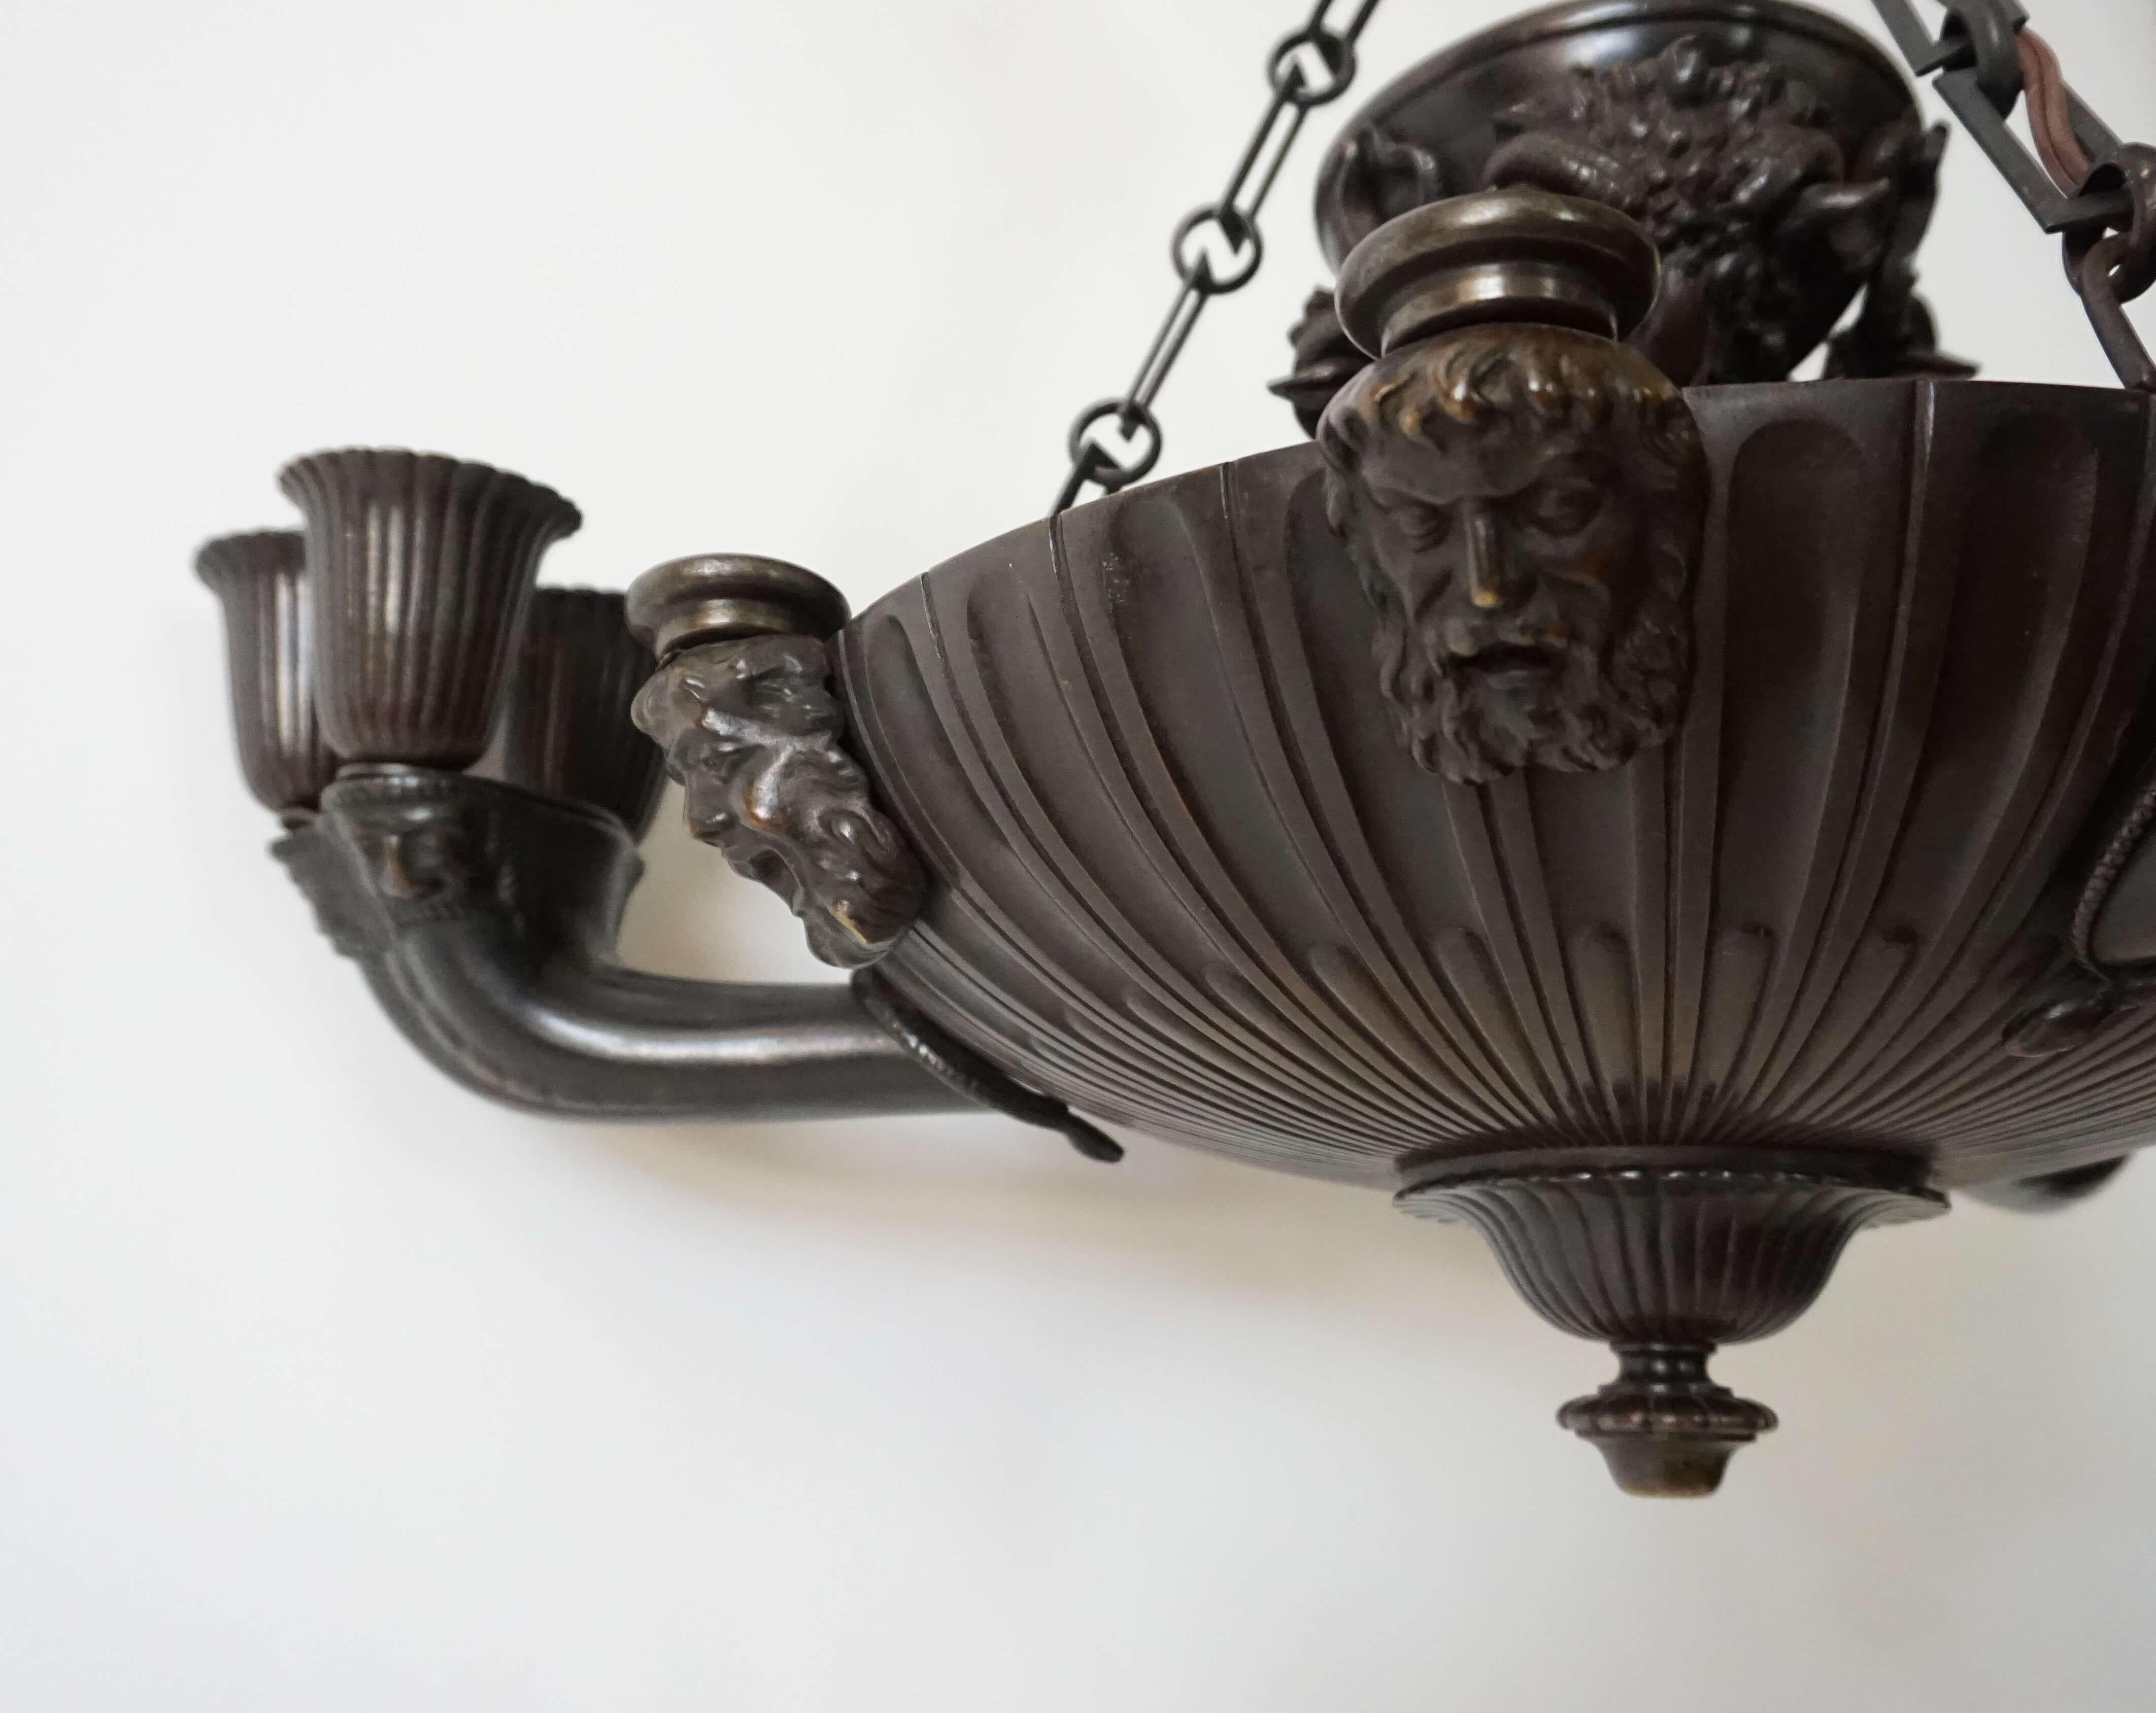 Elegant and rare circa 1825 English Regency George IV period solid patinated bronze chandelier in neoclassical 'Grecian' style having molded ceiling canopy issuing twist-stem standard joining gadrooned lambs tongue 'collar' connecting chains to